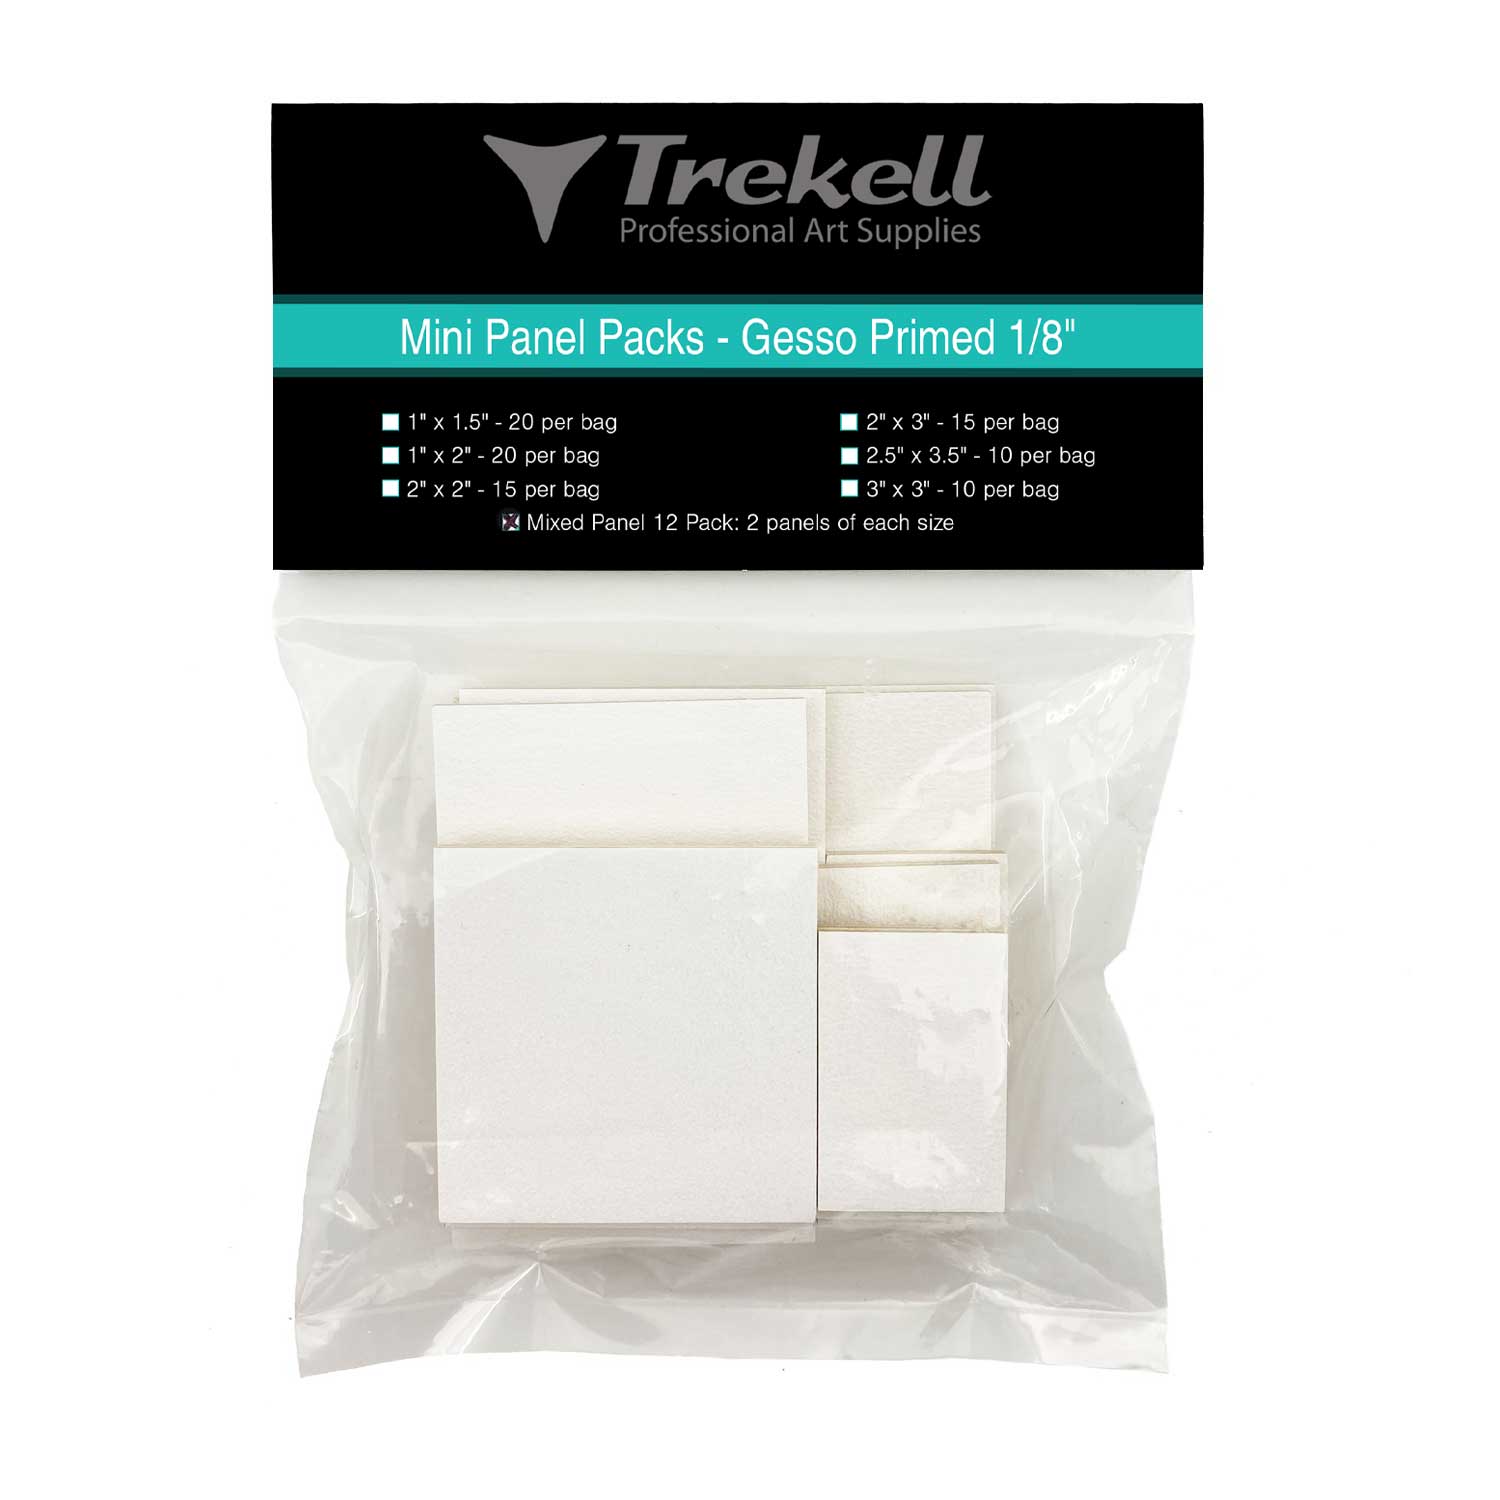 Mini Panel Packs - Gesso Primed 1/8" Wooden Canvases for Oil and Acrylic Paint Baltic birch Trekell Art Supplies